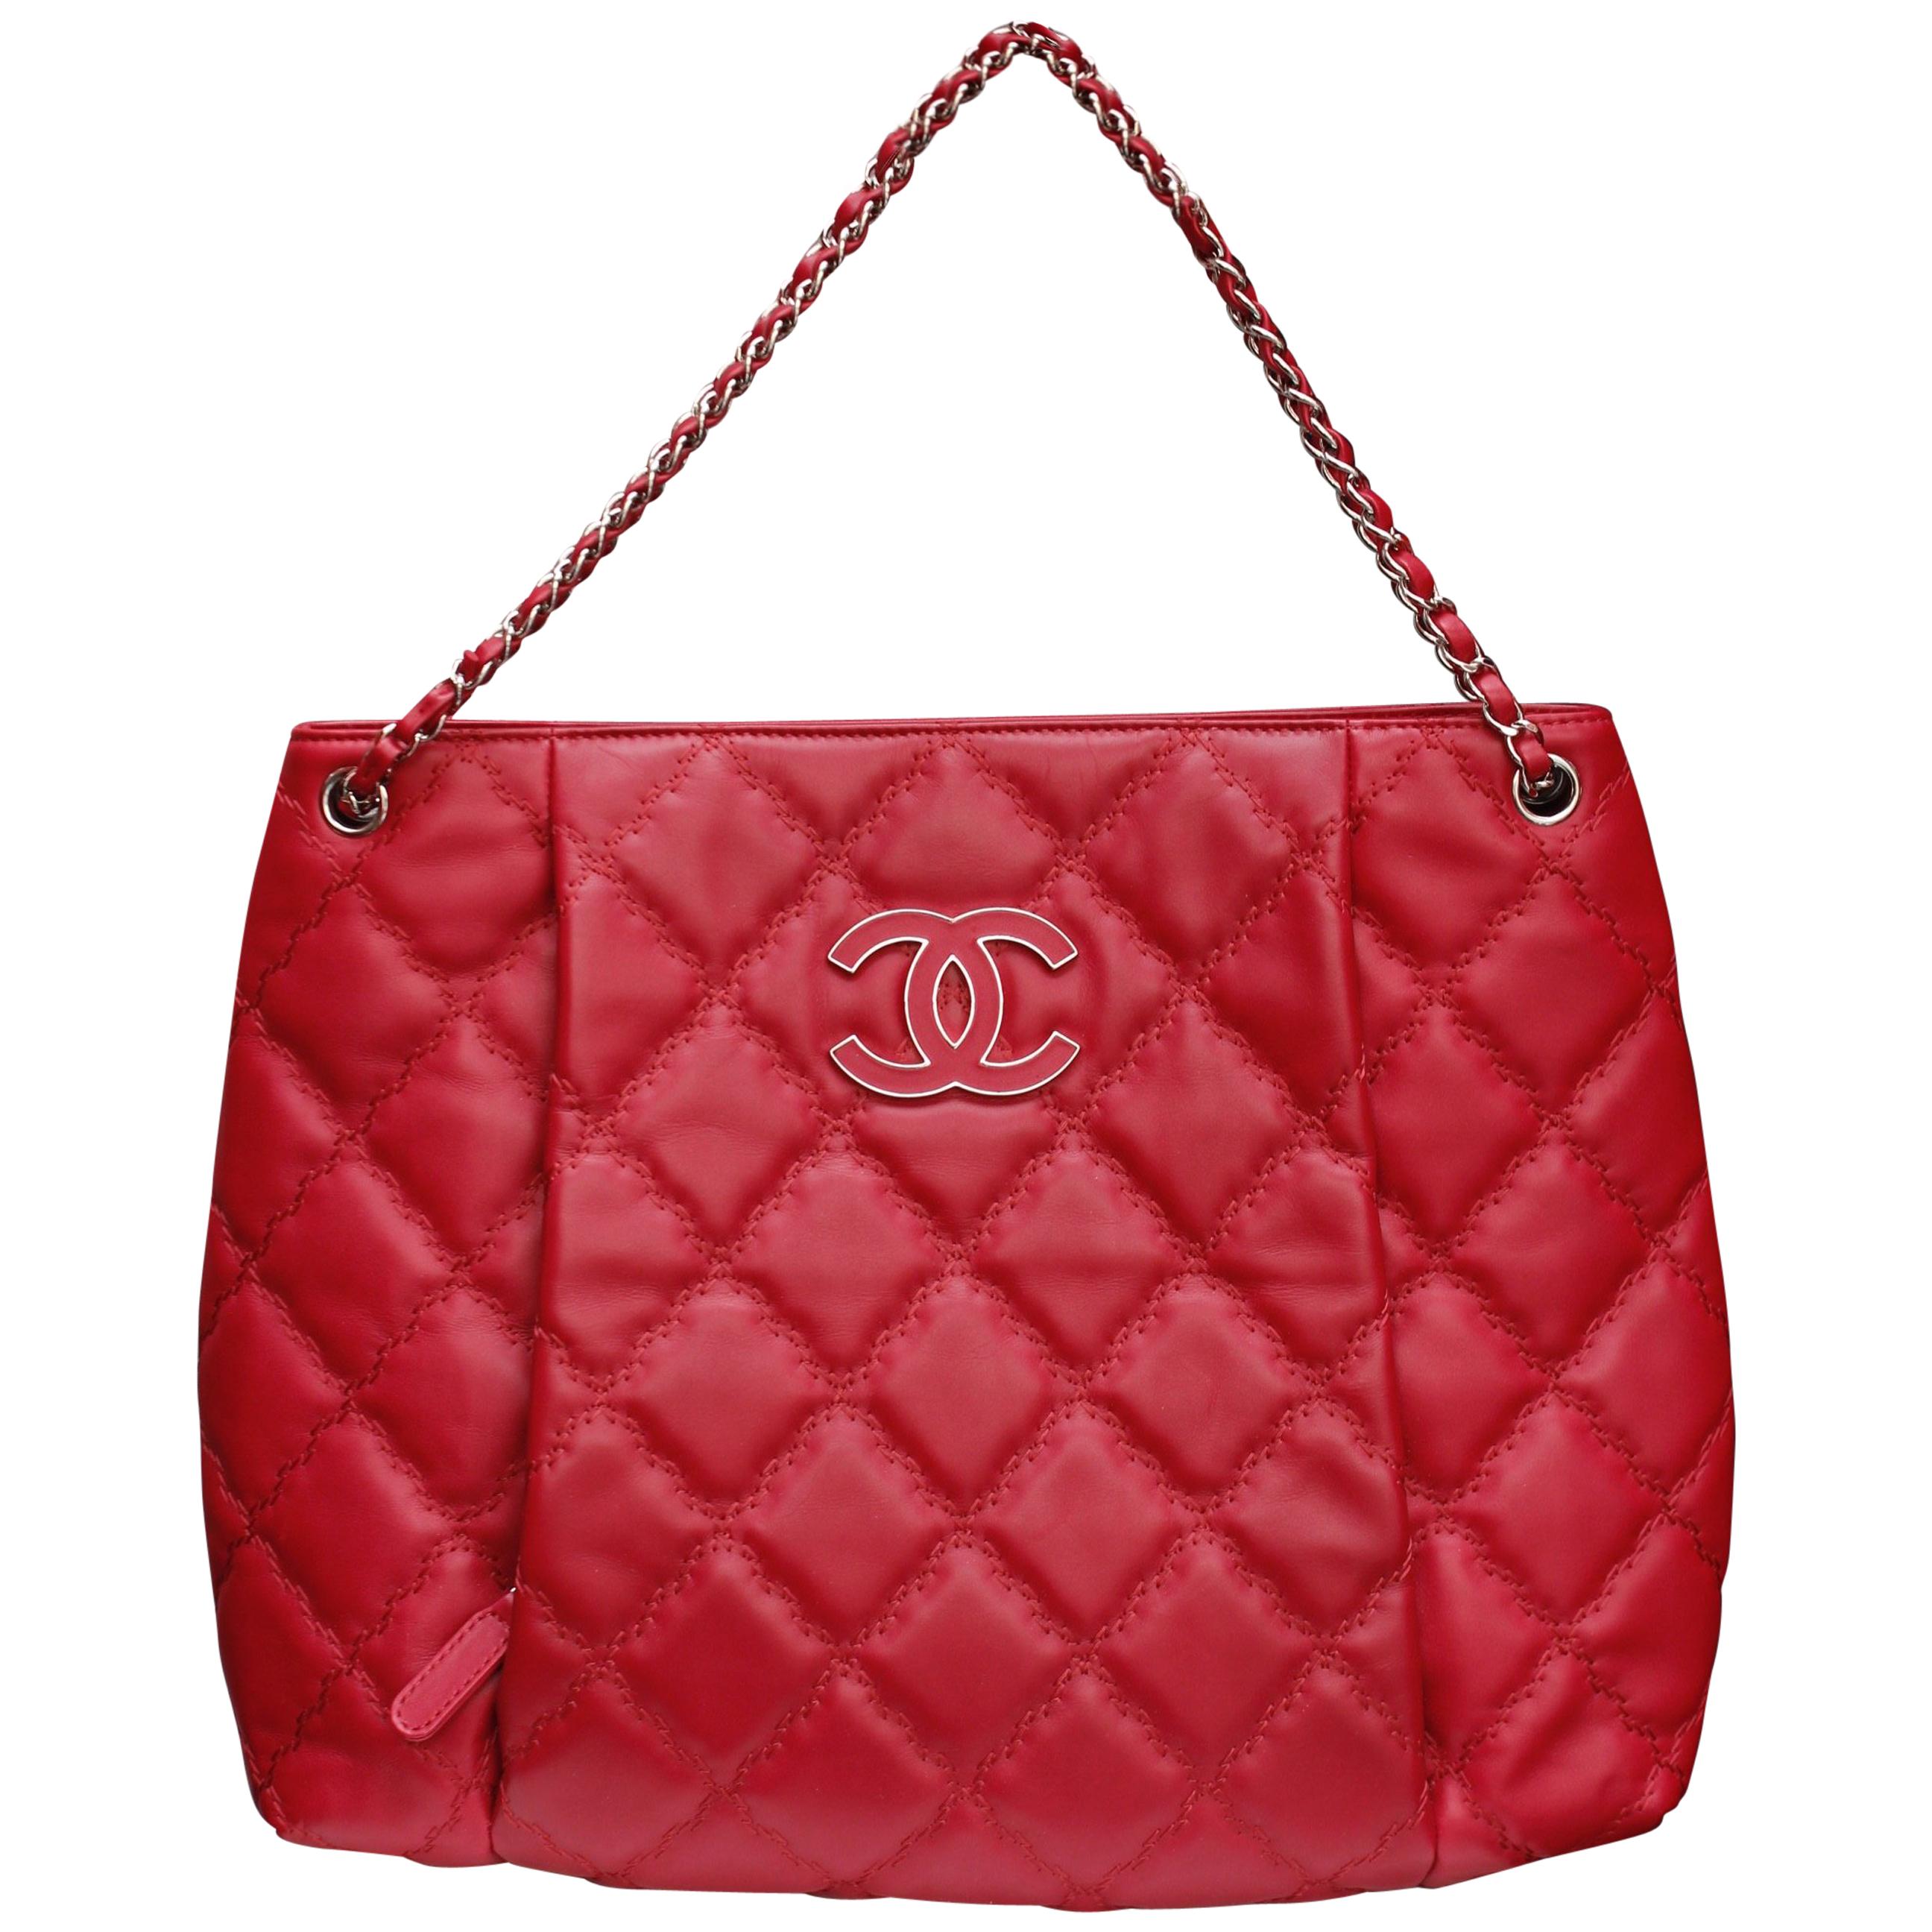 Chanel cherry red quilted leather tote bag, 2010’s For Sale